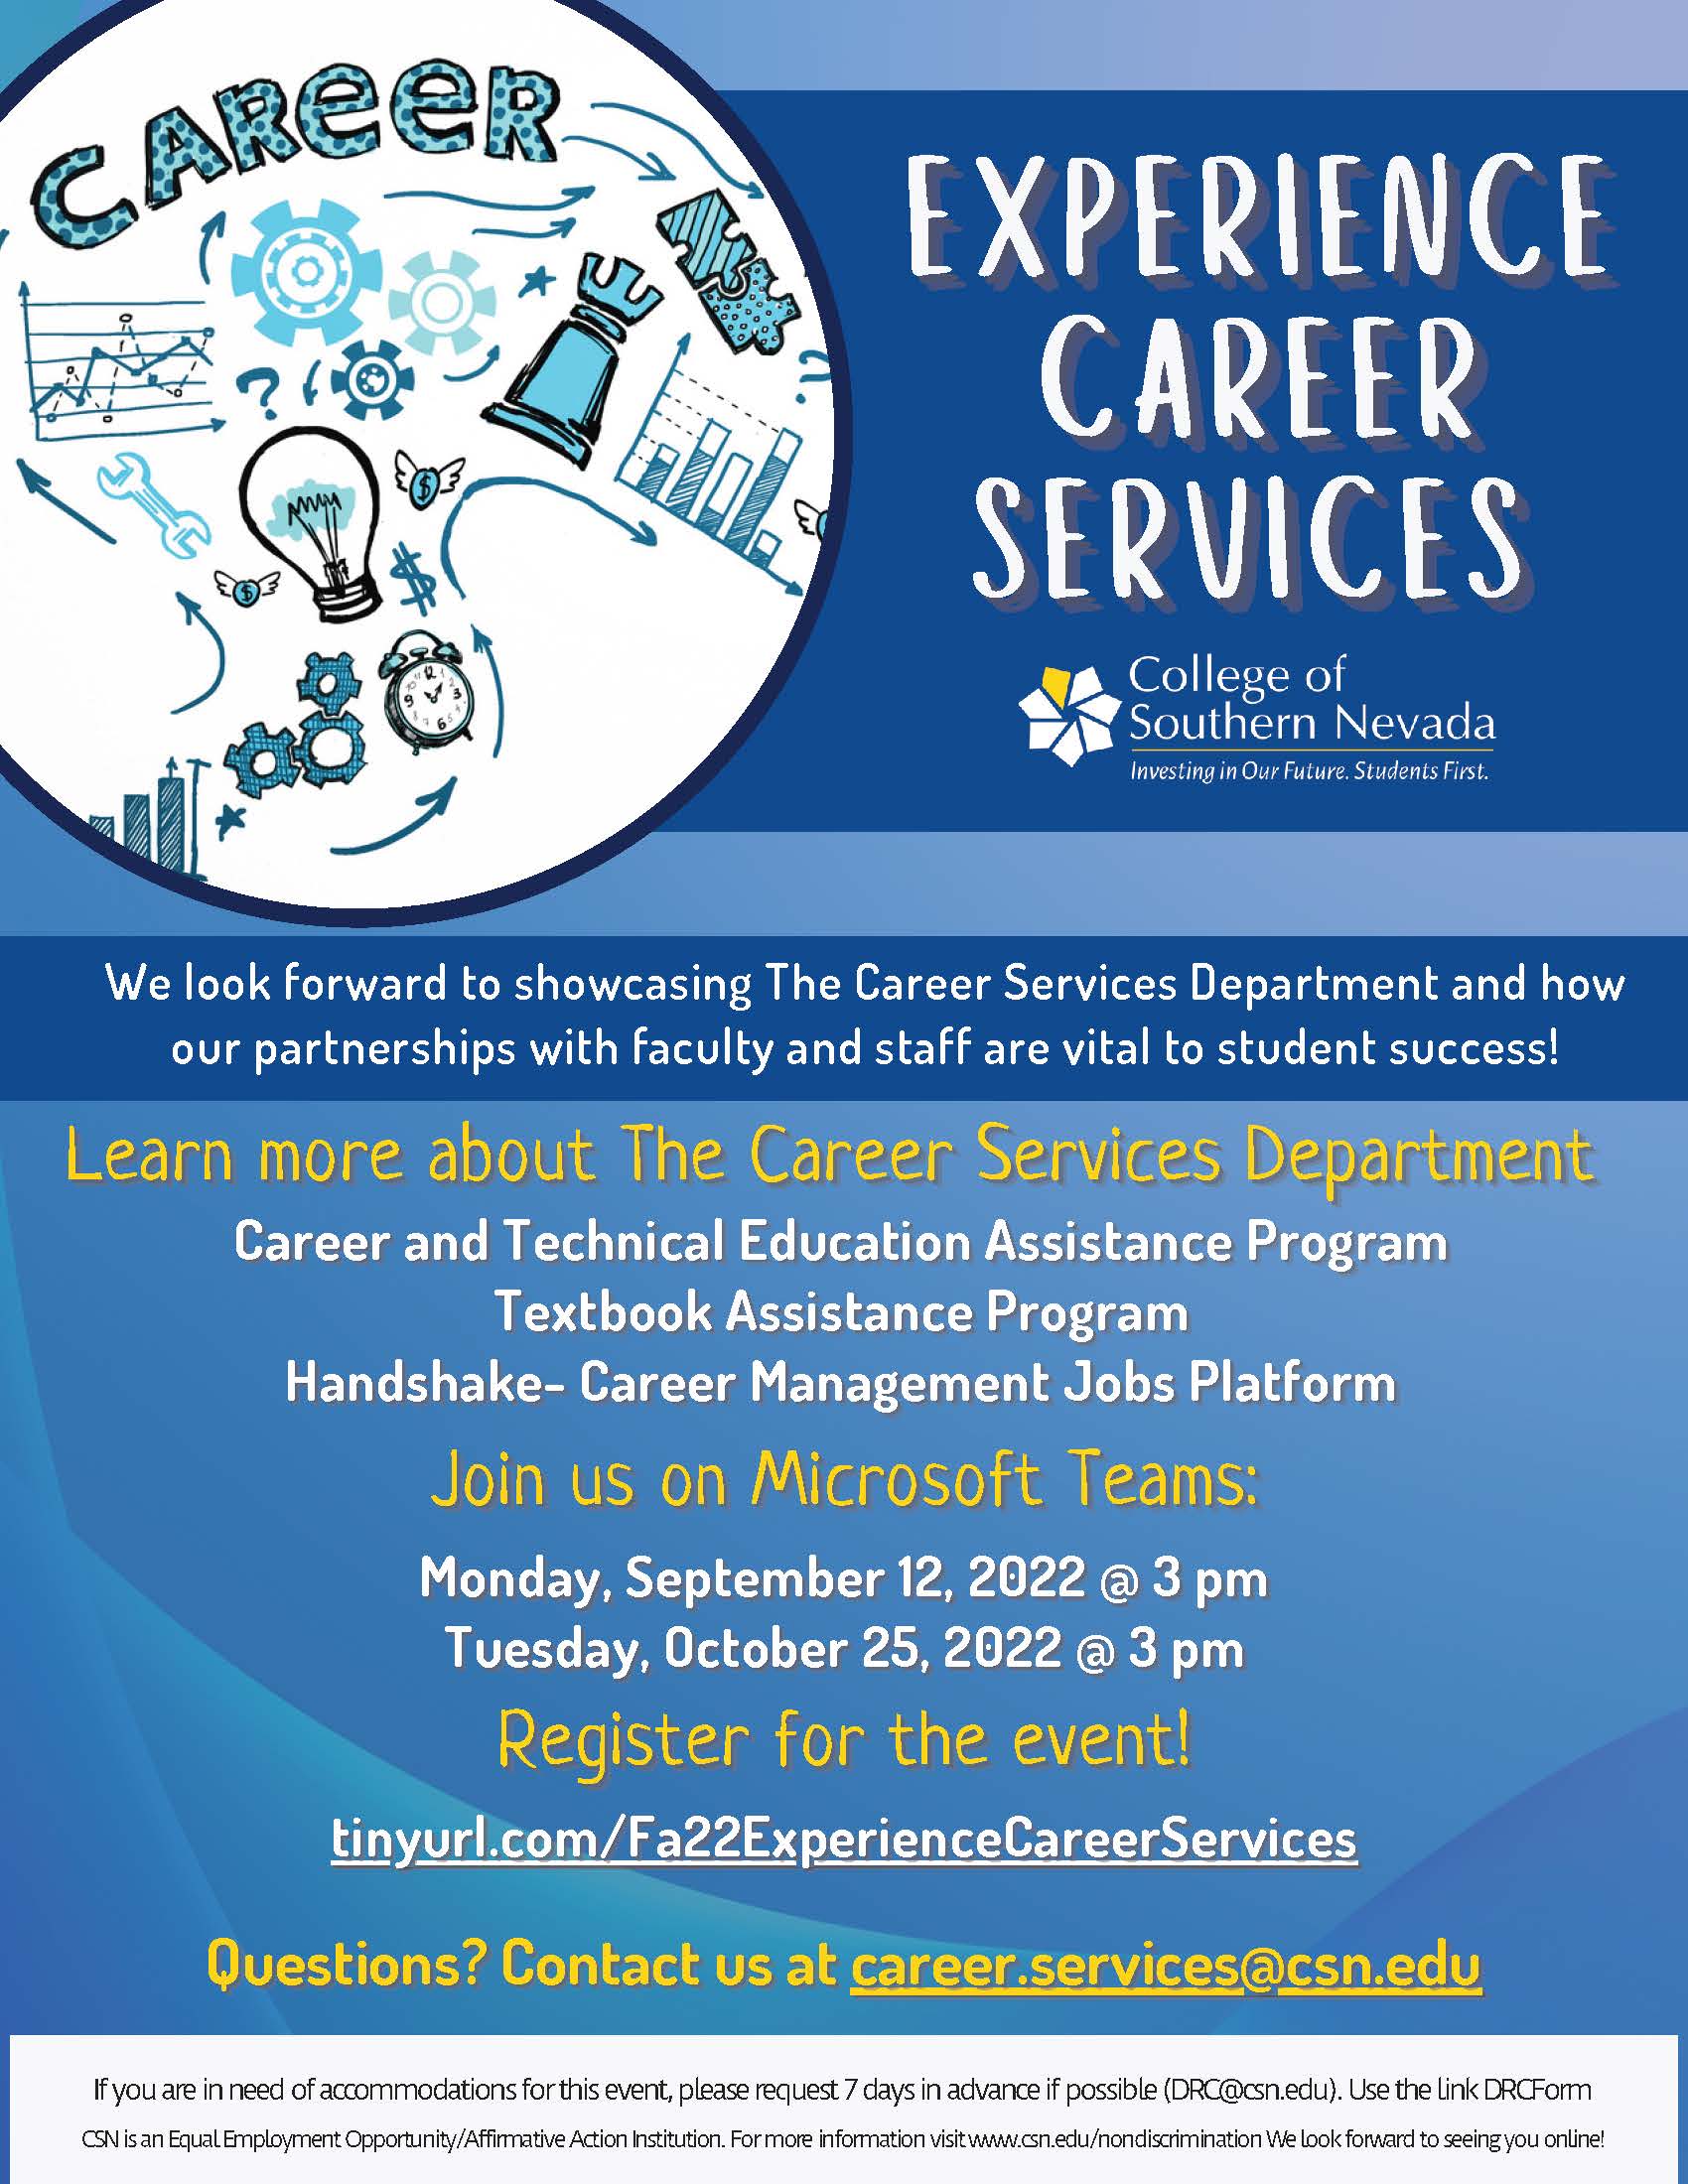 Learn more about The Career Services Department by attending an informational session